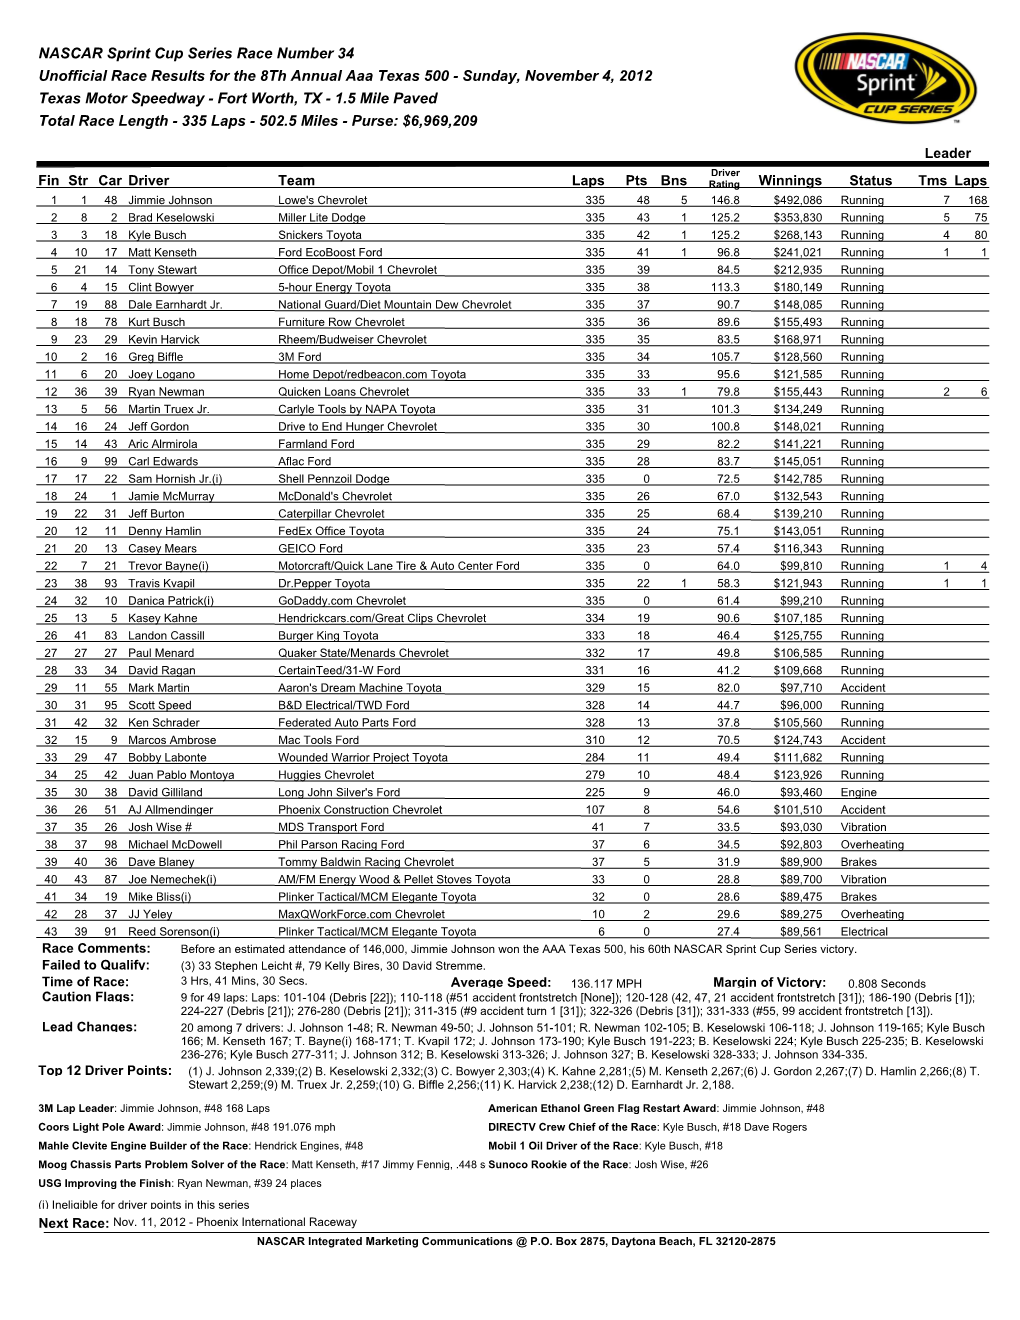 NASCAR Sprint Cup Series Race Number 34 Unofficial Race Results